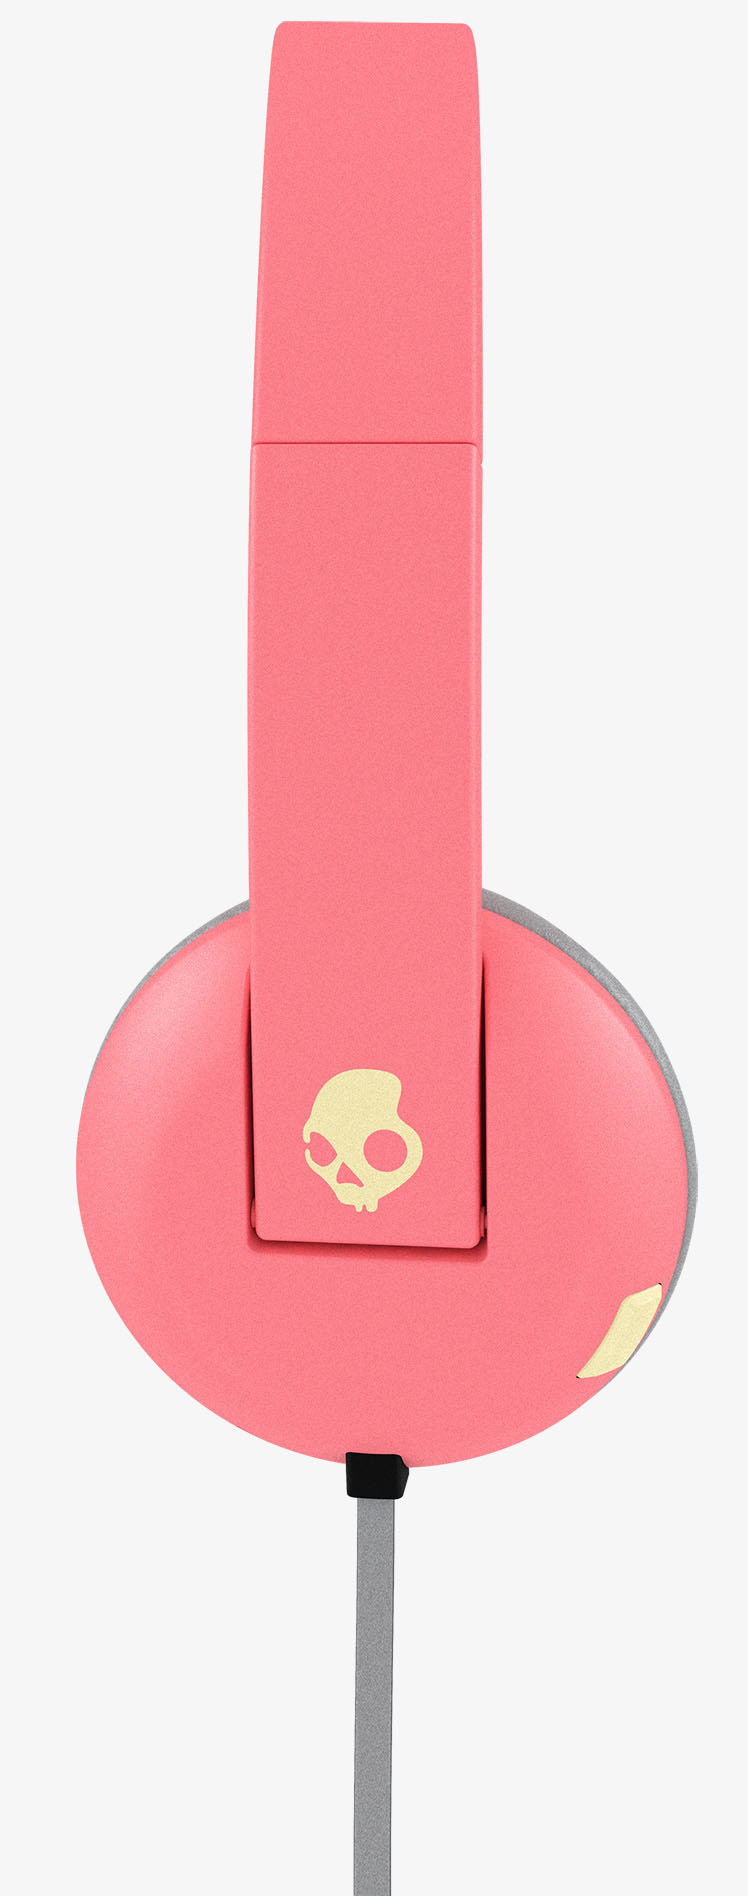 Skullcandy Uproar with Tap Techill Famed/Coral/Cream Headphones